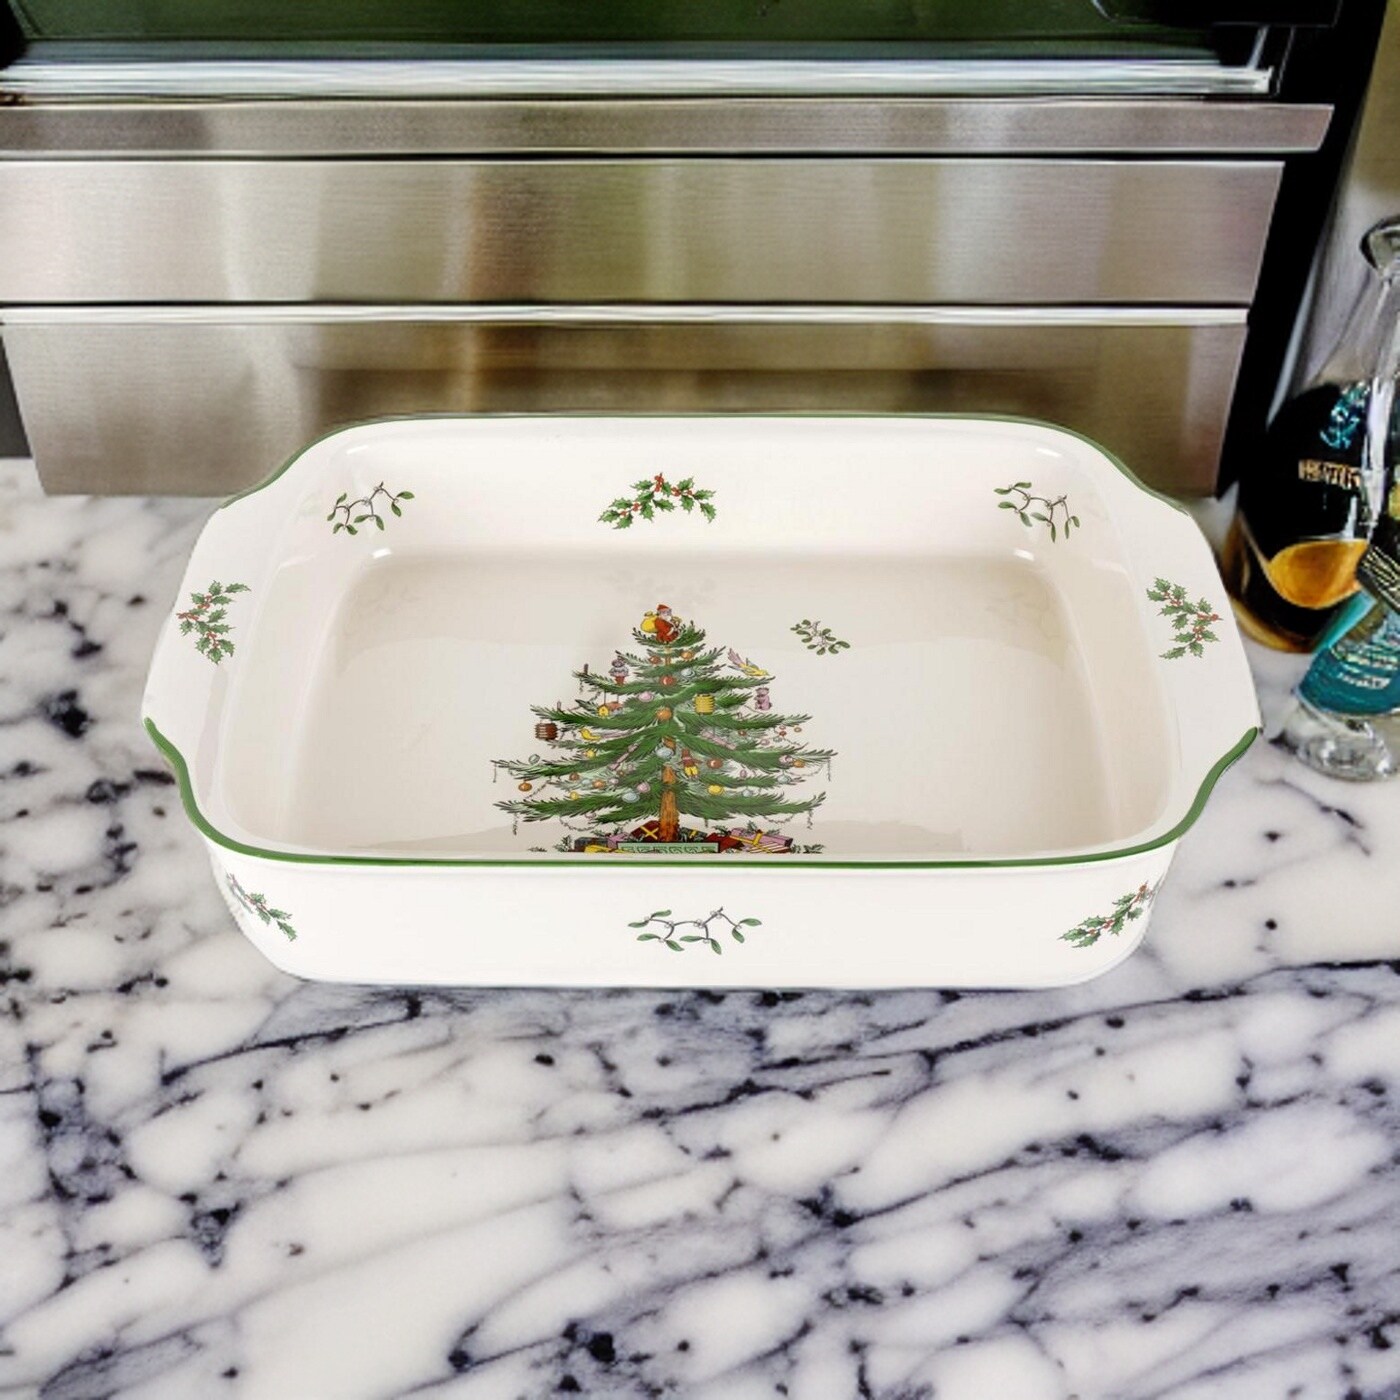 https://ak1.ostkcdn.com/images/products/is/images/direct/8235af36d2e9def0bfacd31b6dc1621000996073/Spode-Christmas-Tree-Rectangular-Handled-Dish.jpg